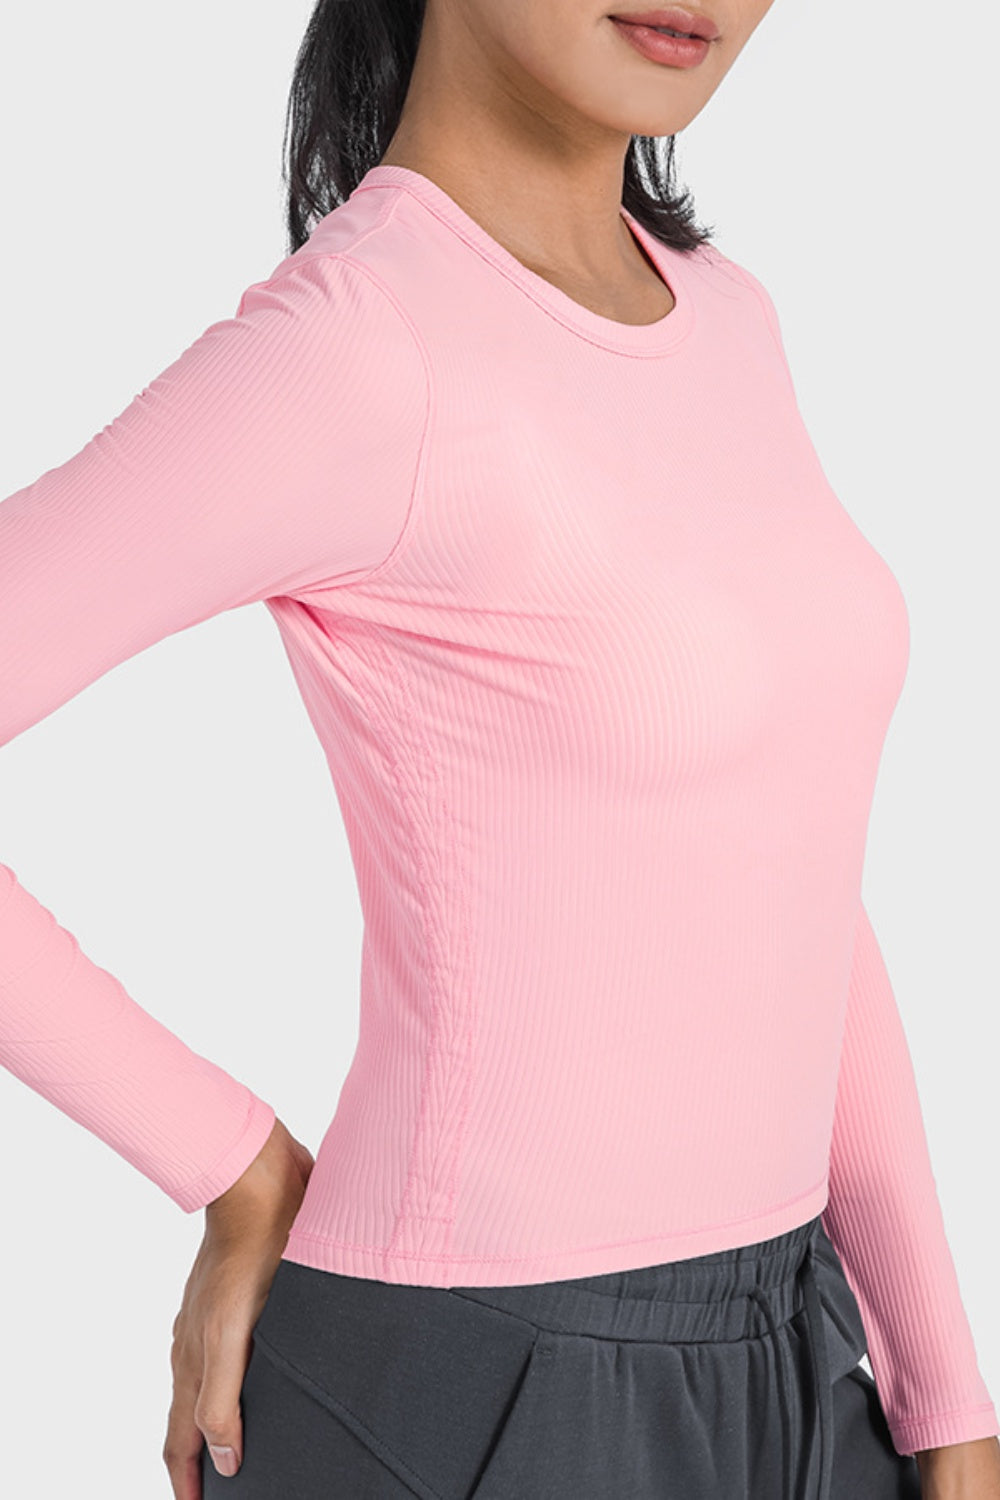 Misty Rose Round Neck Long Sleeve Sports Top Sentient Beauty Fashions tops